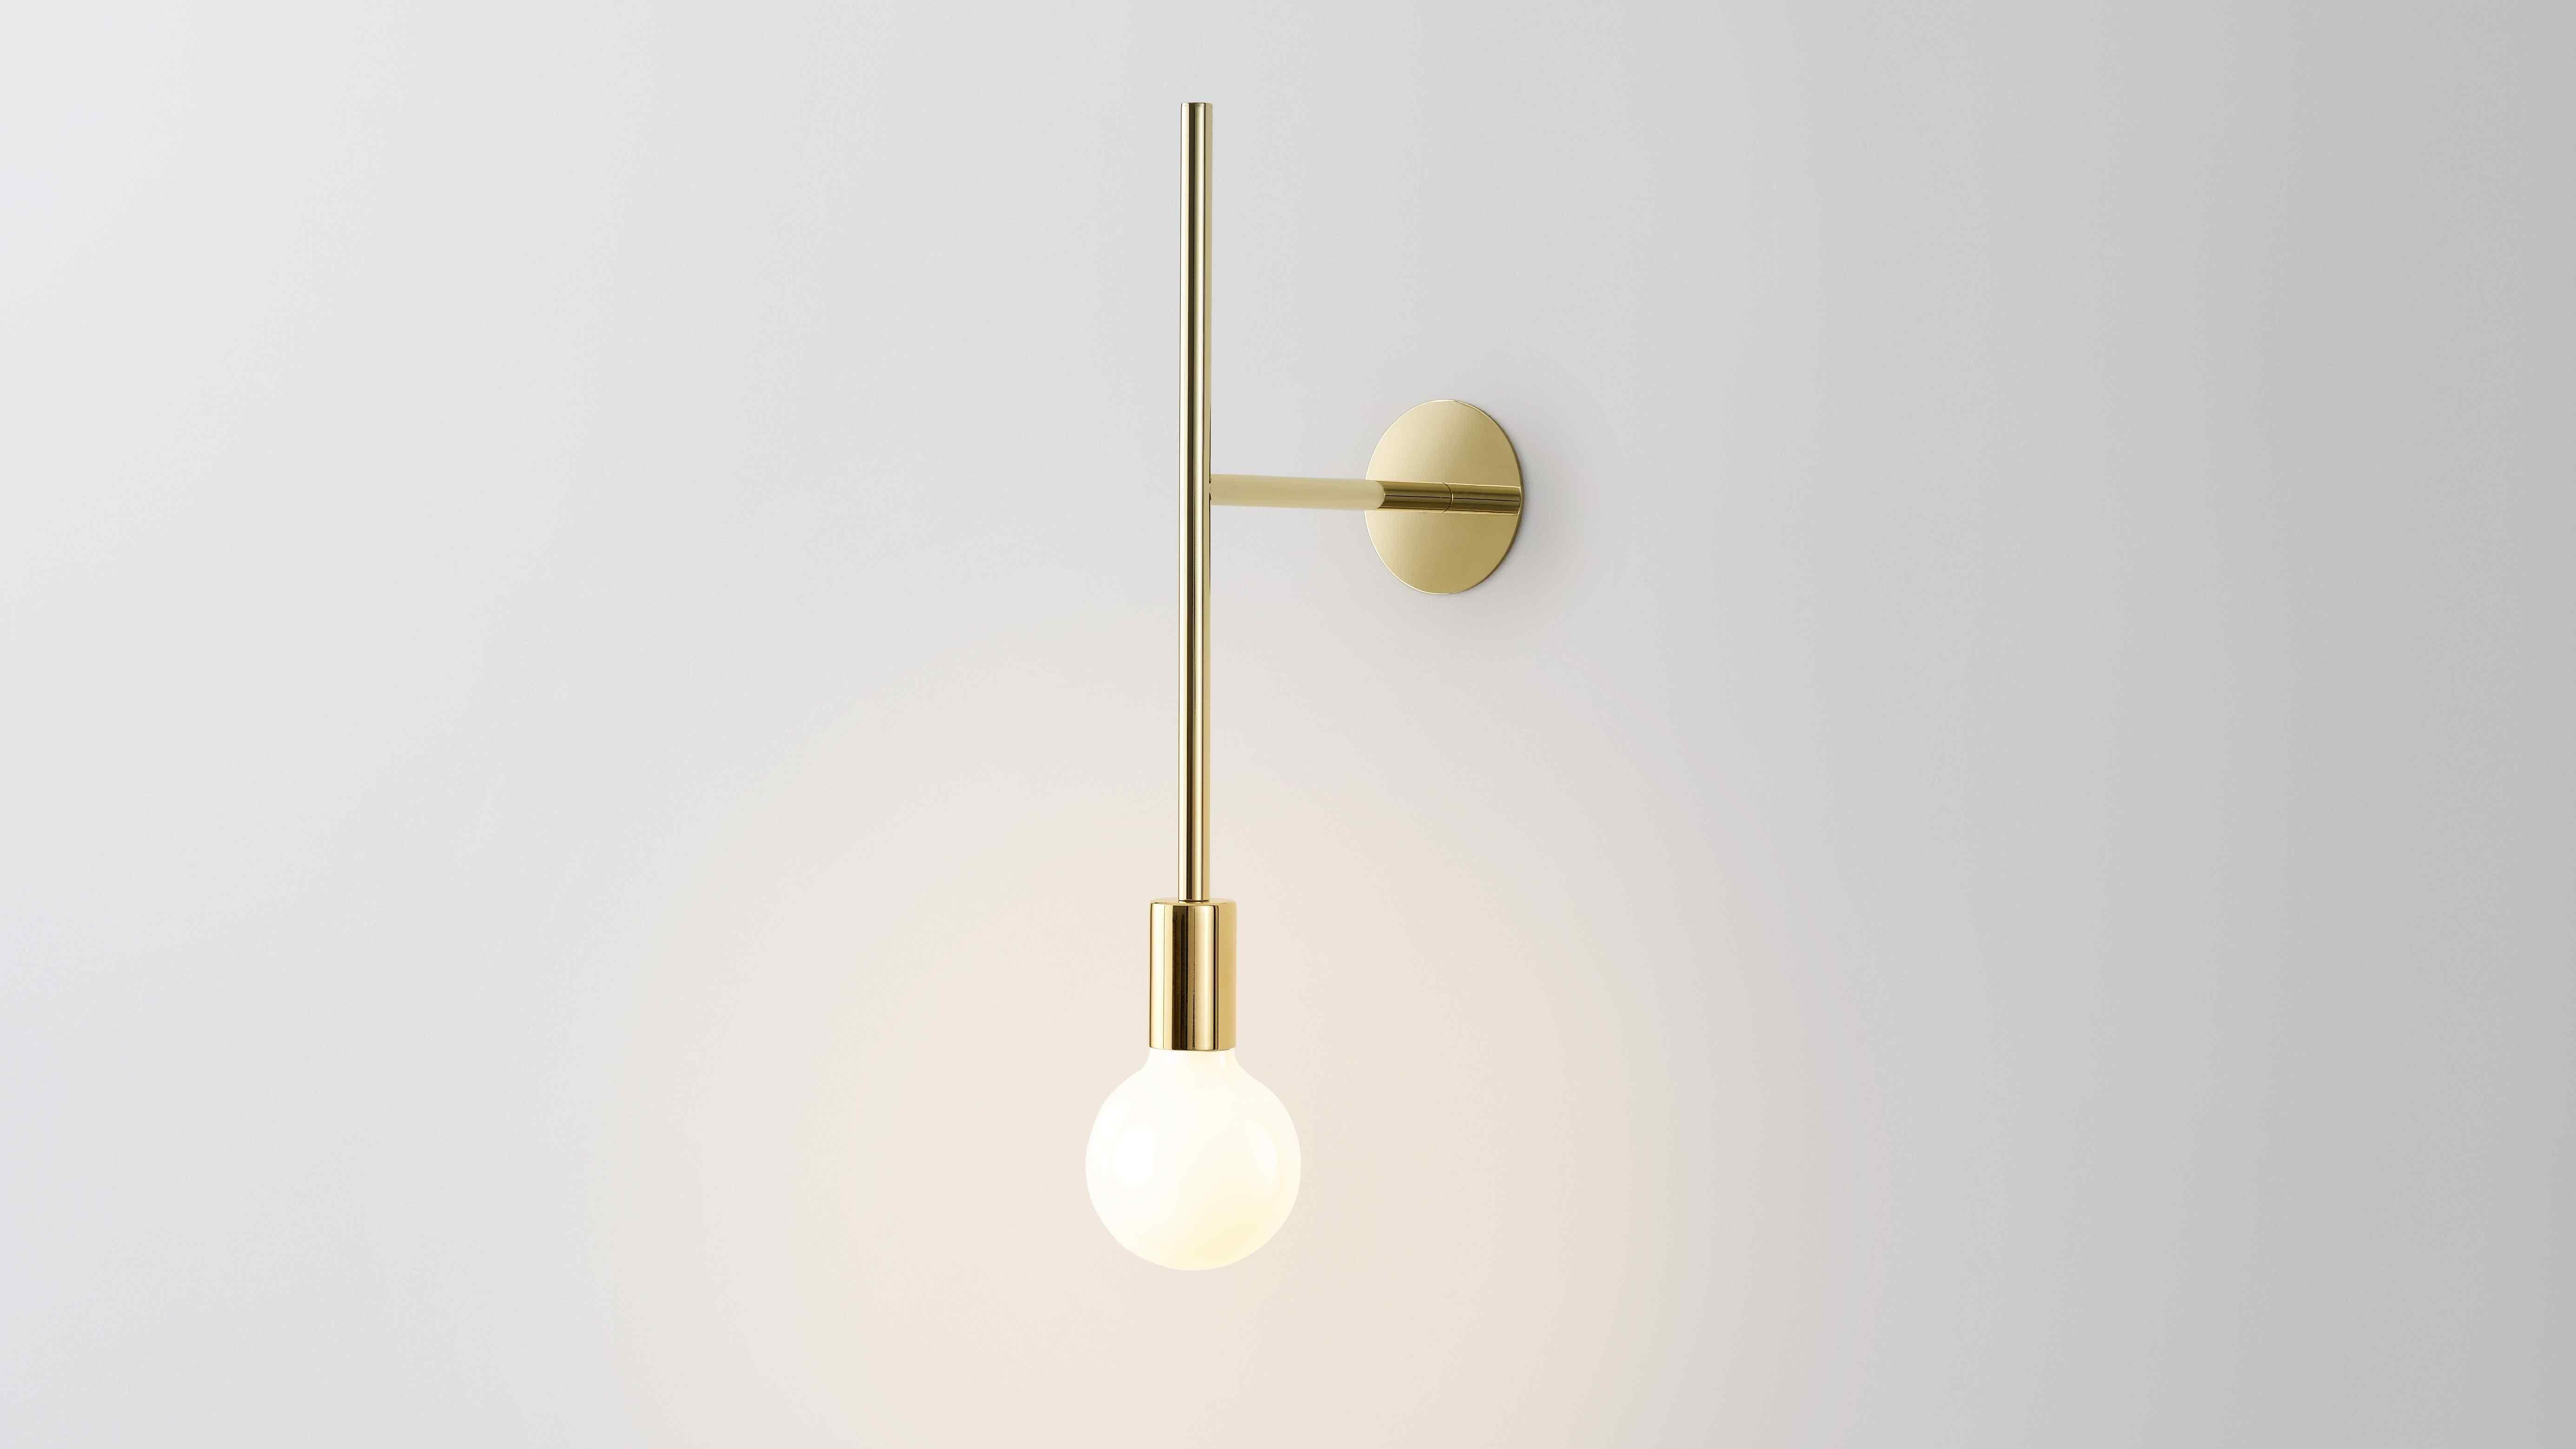 Wall powered wall step by Volker Haug
Dimensions: W 24.8 x H 55 cm
Materials: Polished, bronzed brass or steel
Finish: Raw, satin lacquer or powdercoat
Weight: approximately 1.2 kg

Lamp: 240V E27 (120V E26 US) 
Custom finishes available on